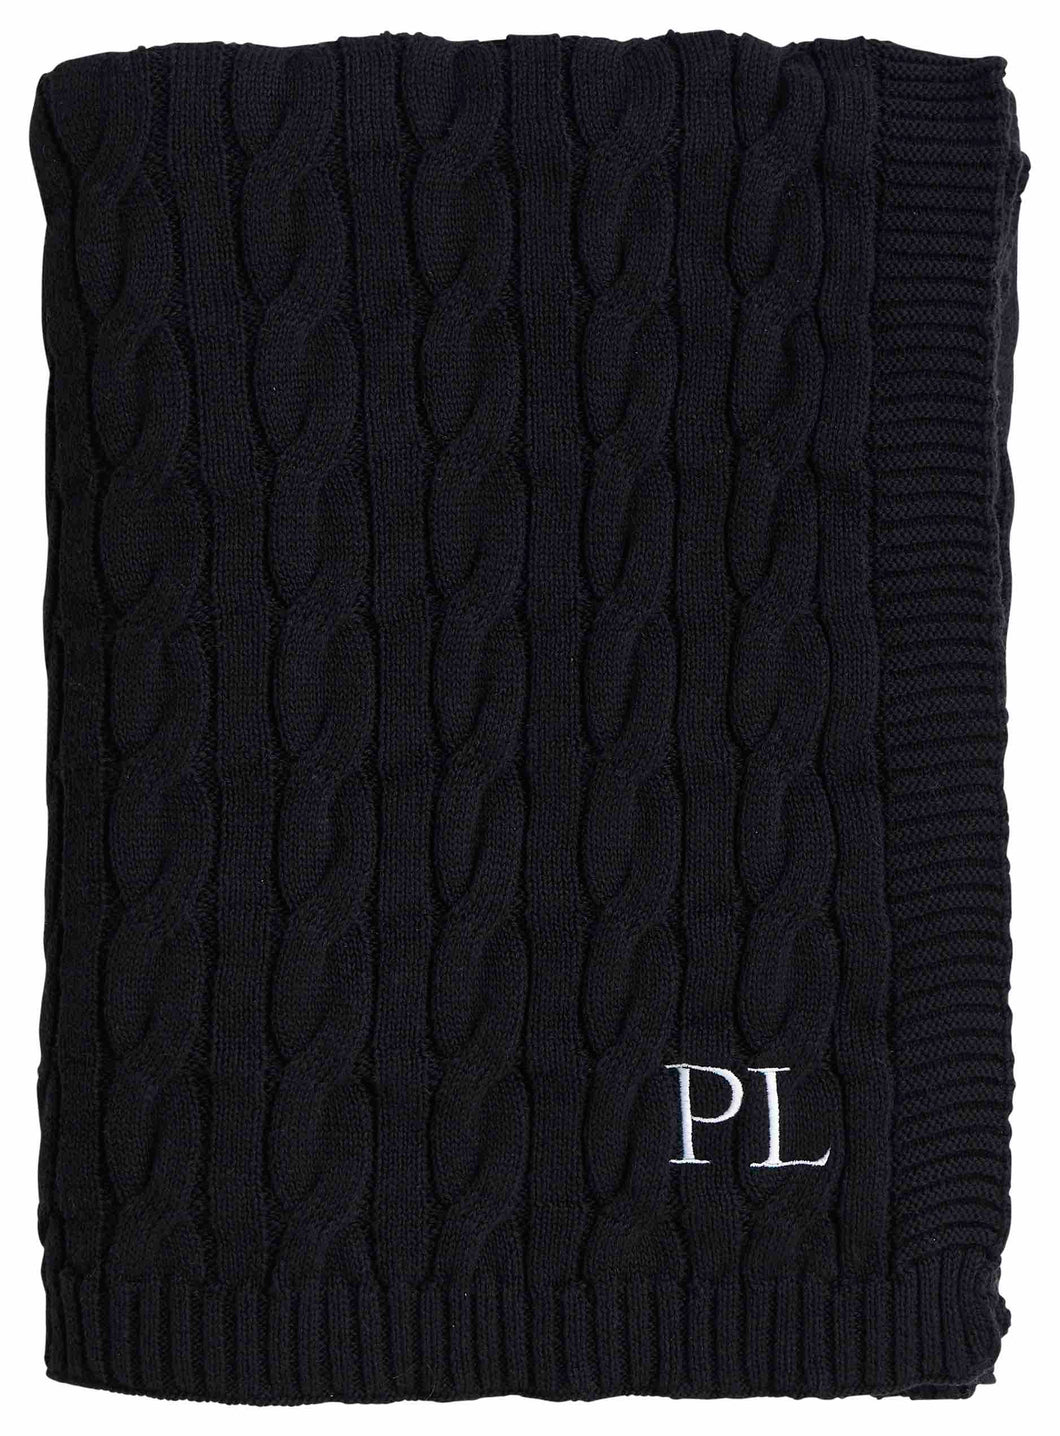 Cable knit black throw (130 x 170)